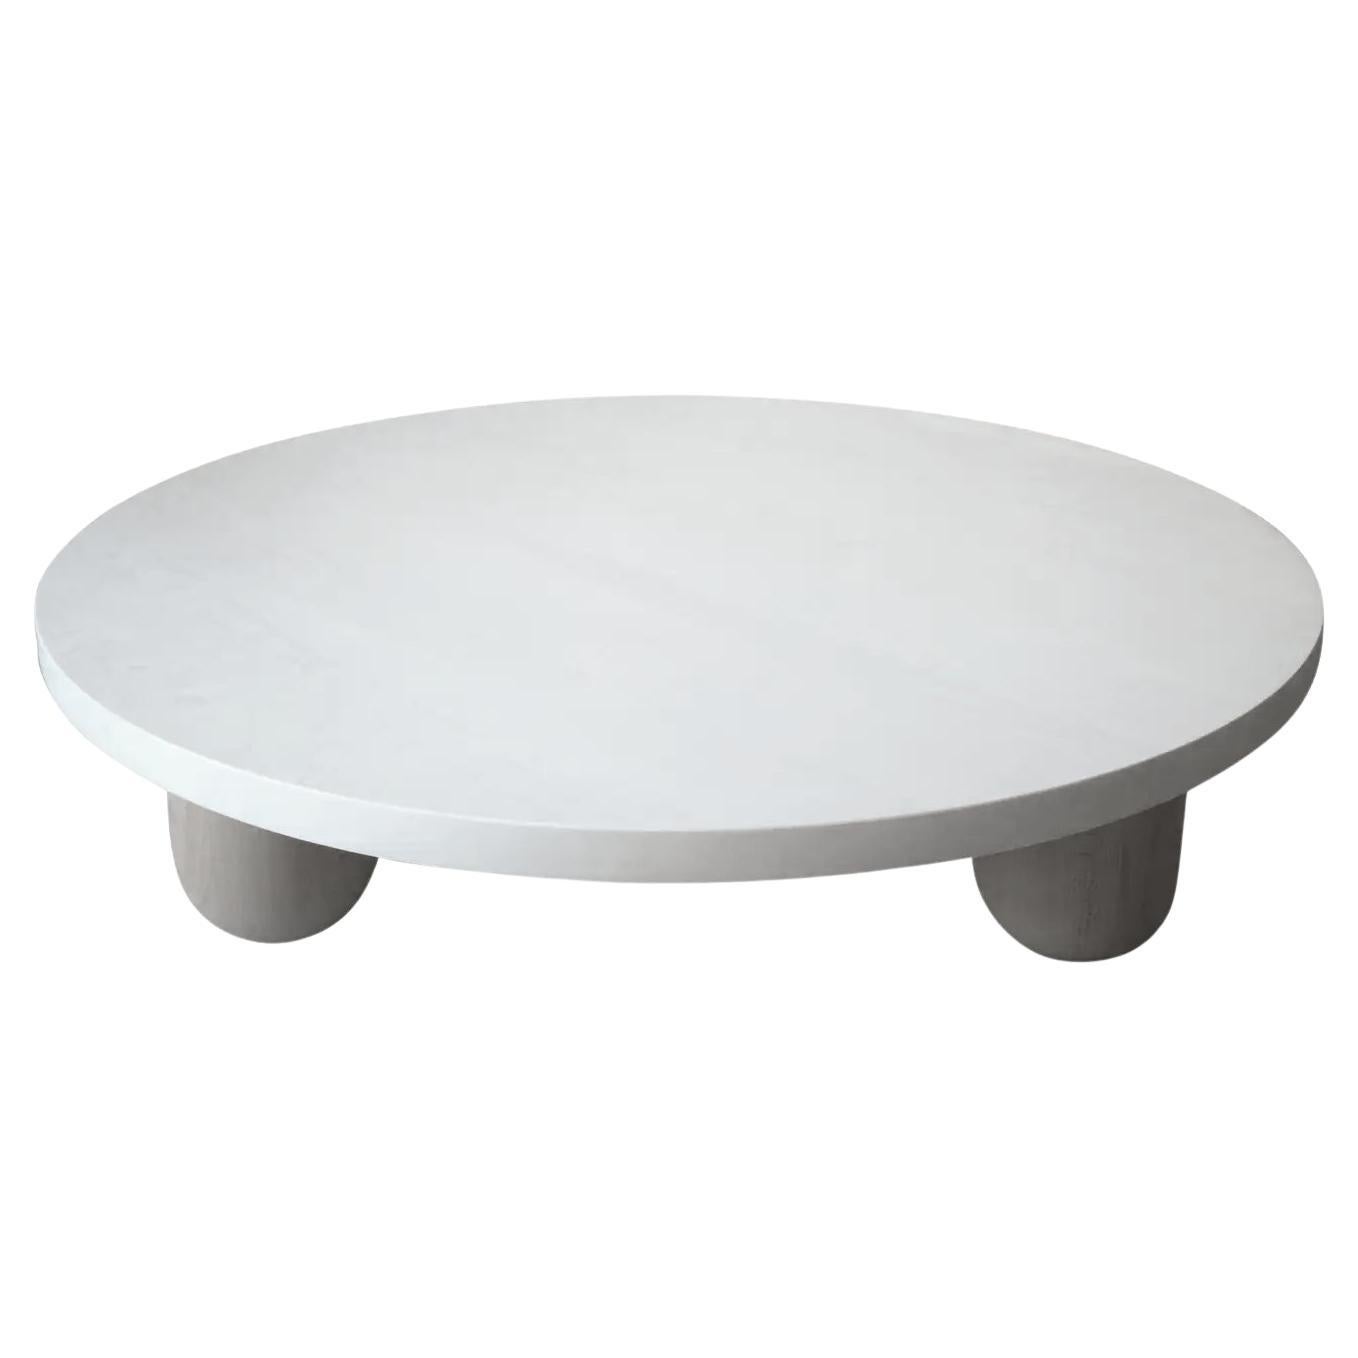 Large Round White Column Coffee Table by MSJ Furniture Studio